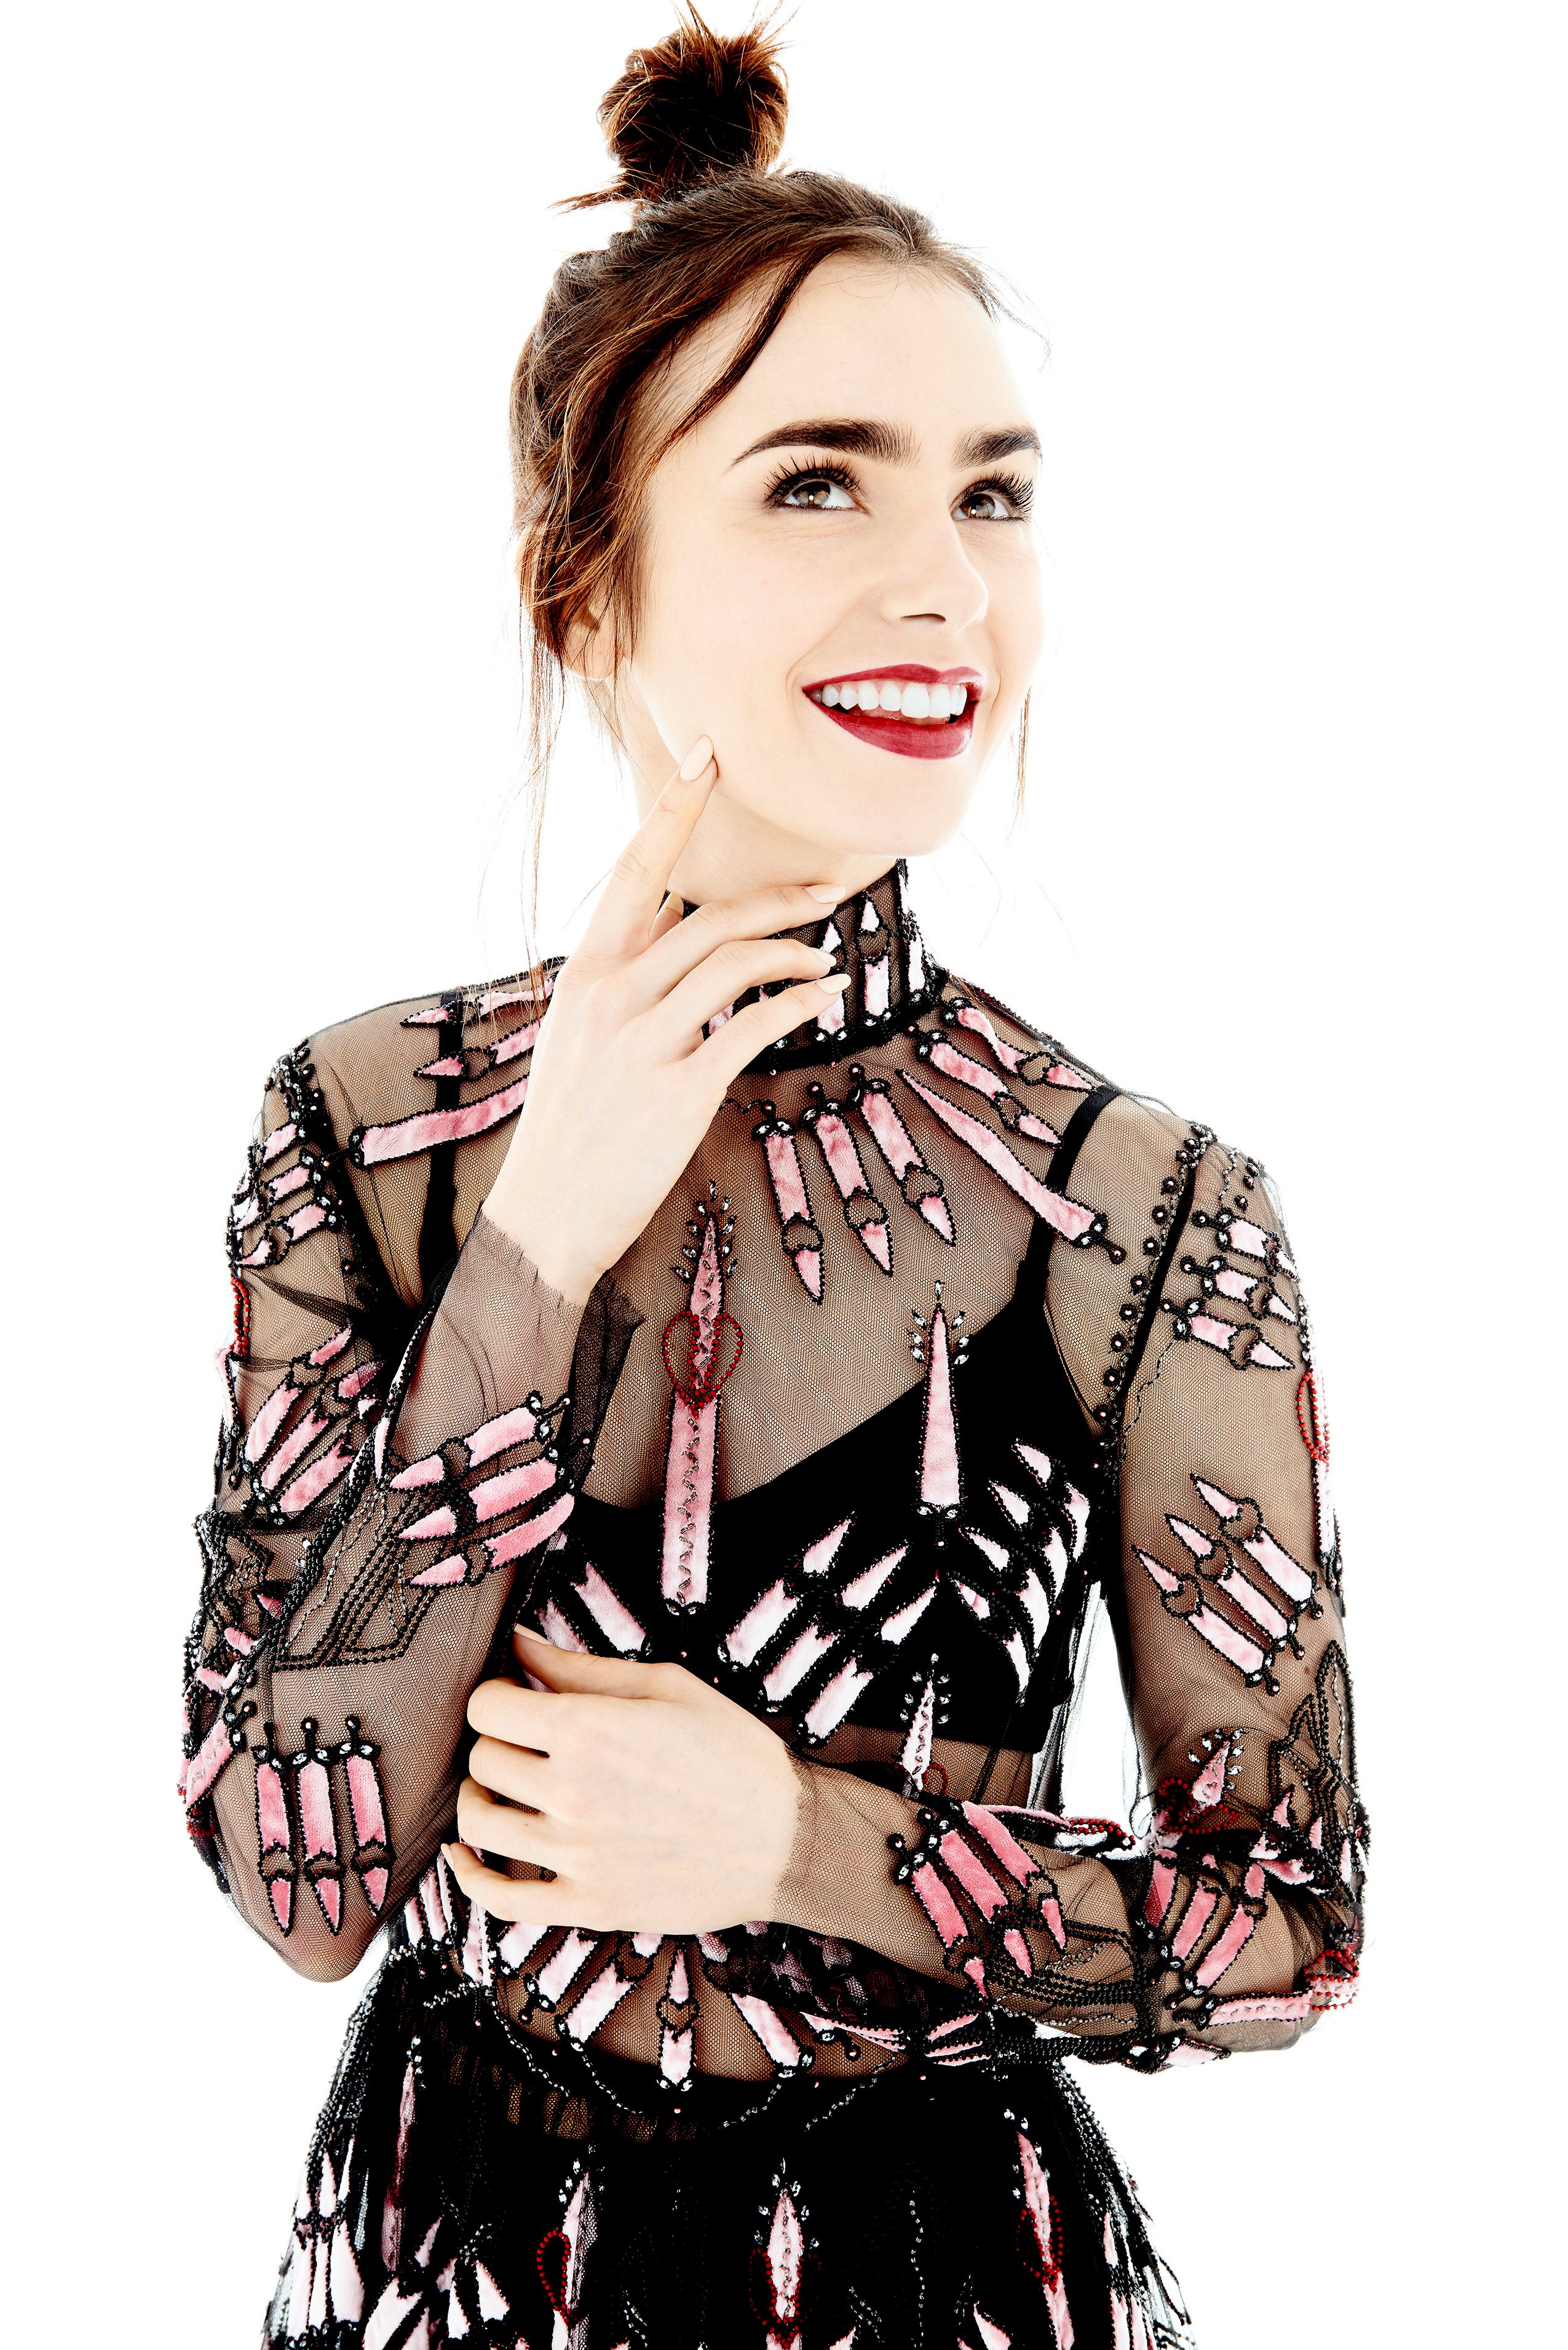 People 2550x3821 Lily Collins women model actress white background lipstick smiling see-through dress curtains red lipstick portrait display simple background studio